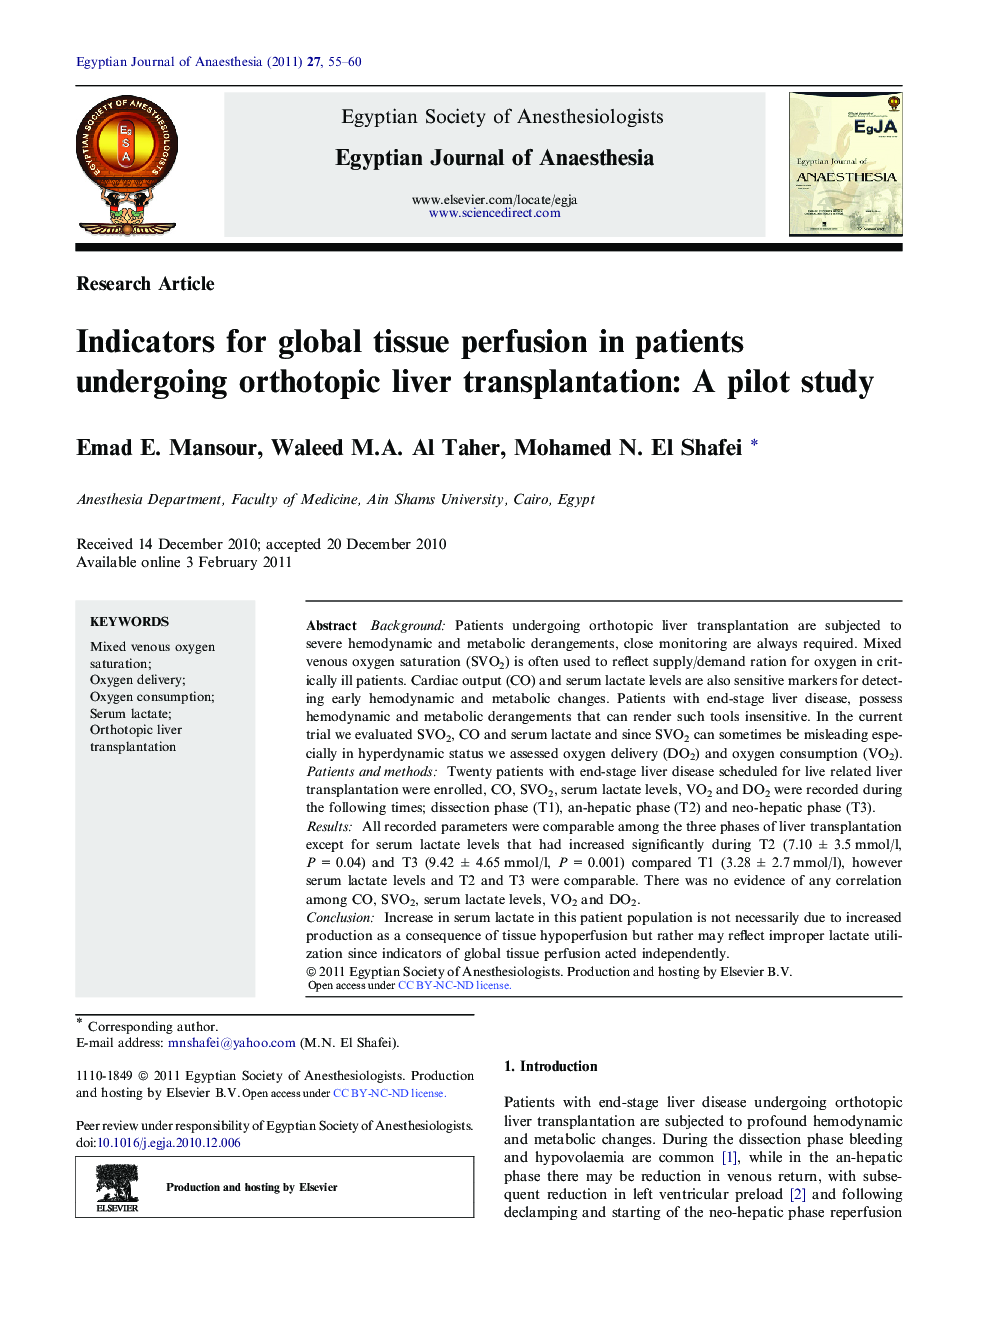 Indicators for global tissue perfusion in patients undergoing orthotopic liver transplantation: A pilot study 